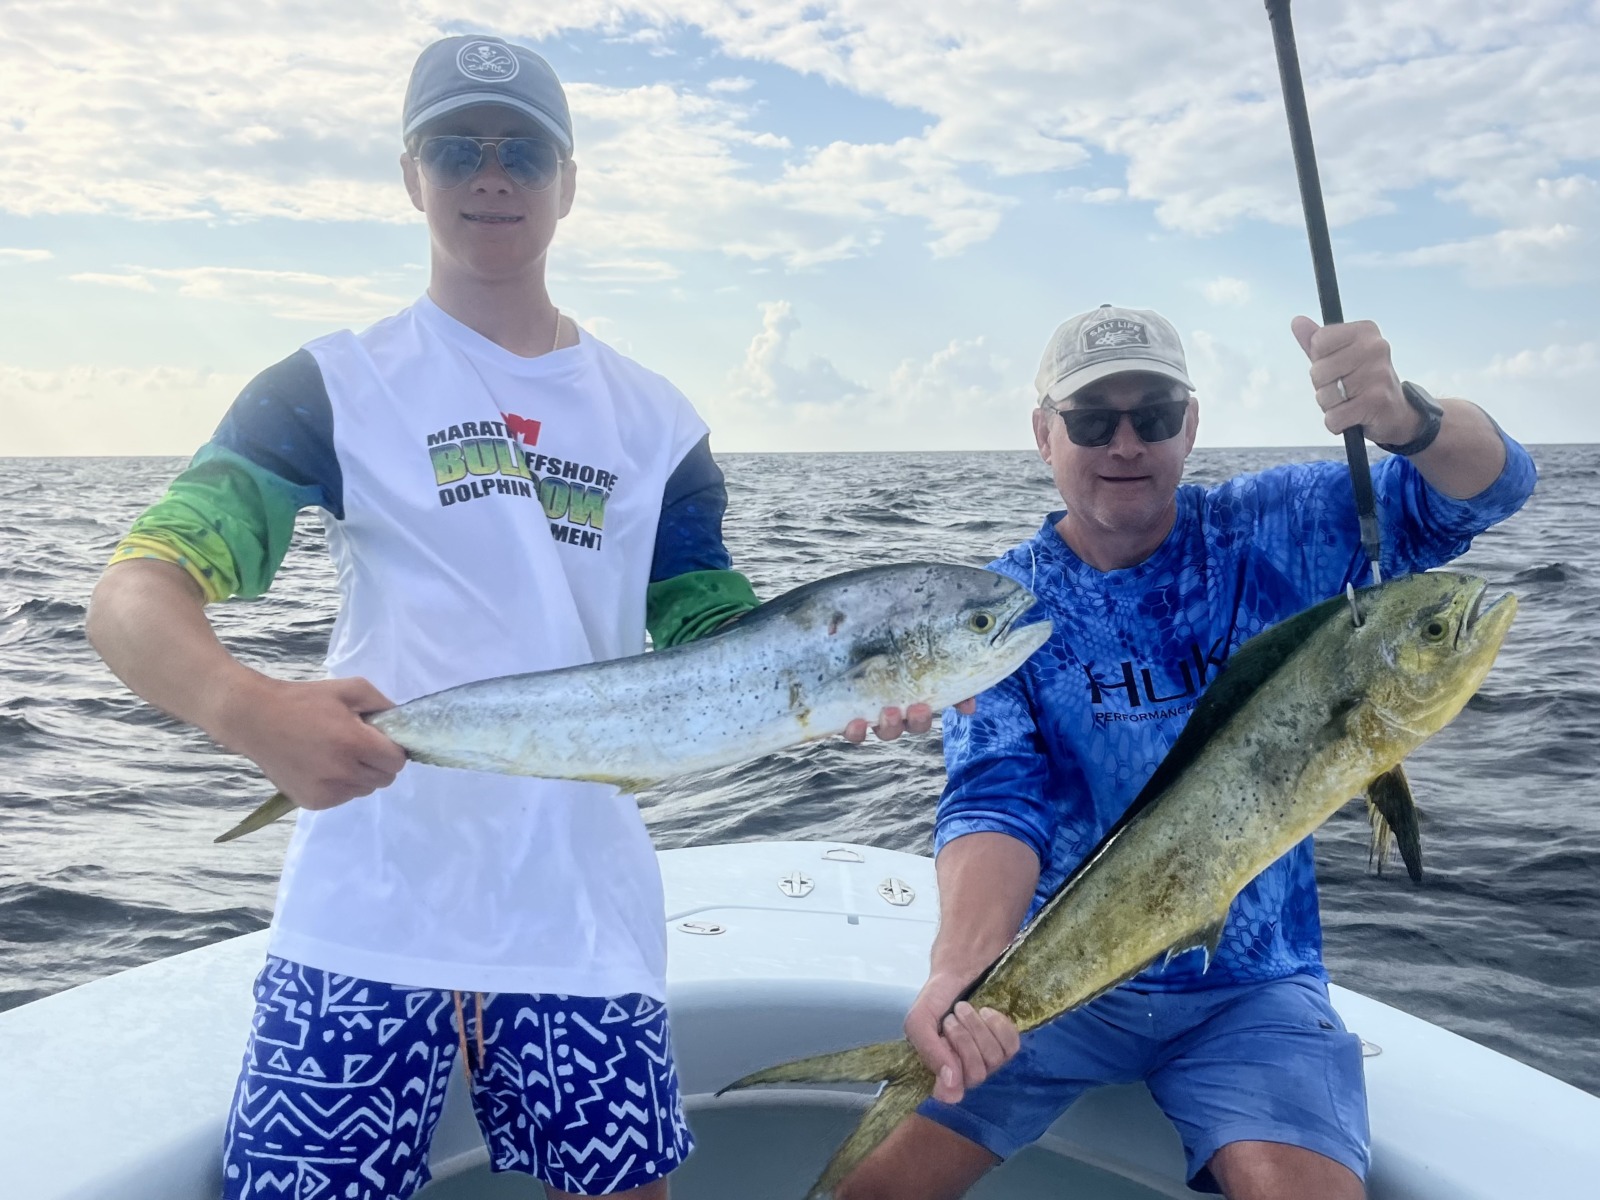 THE ANGLER'S OUTLOOK: FLIPPING THE SWITCH ON THE MAHI BITE